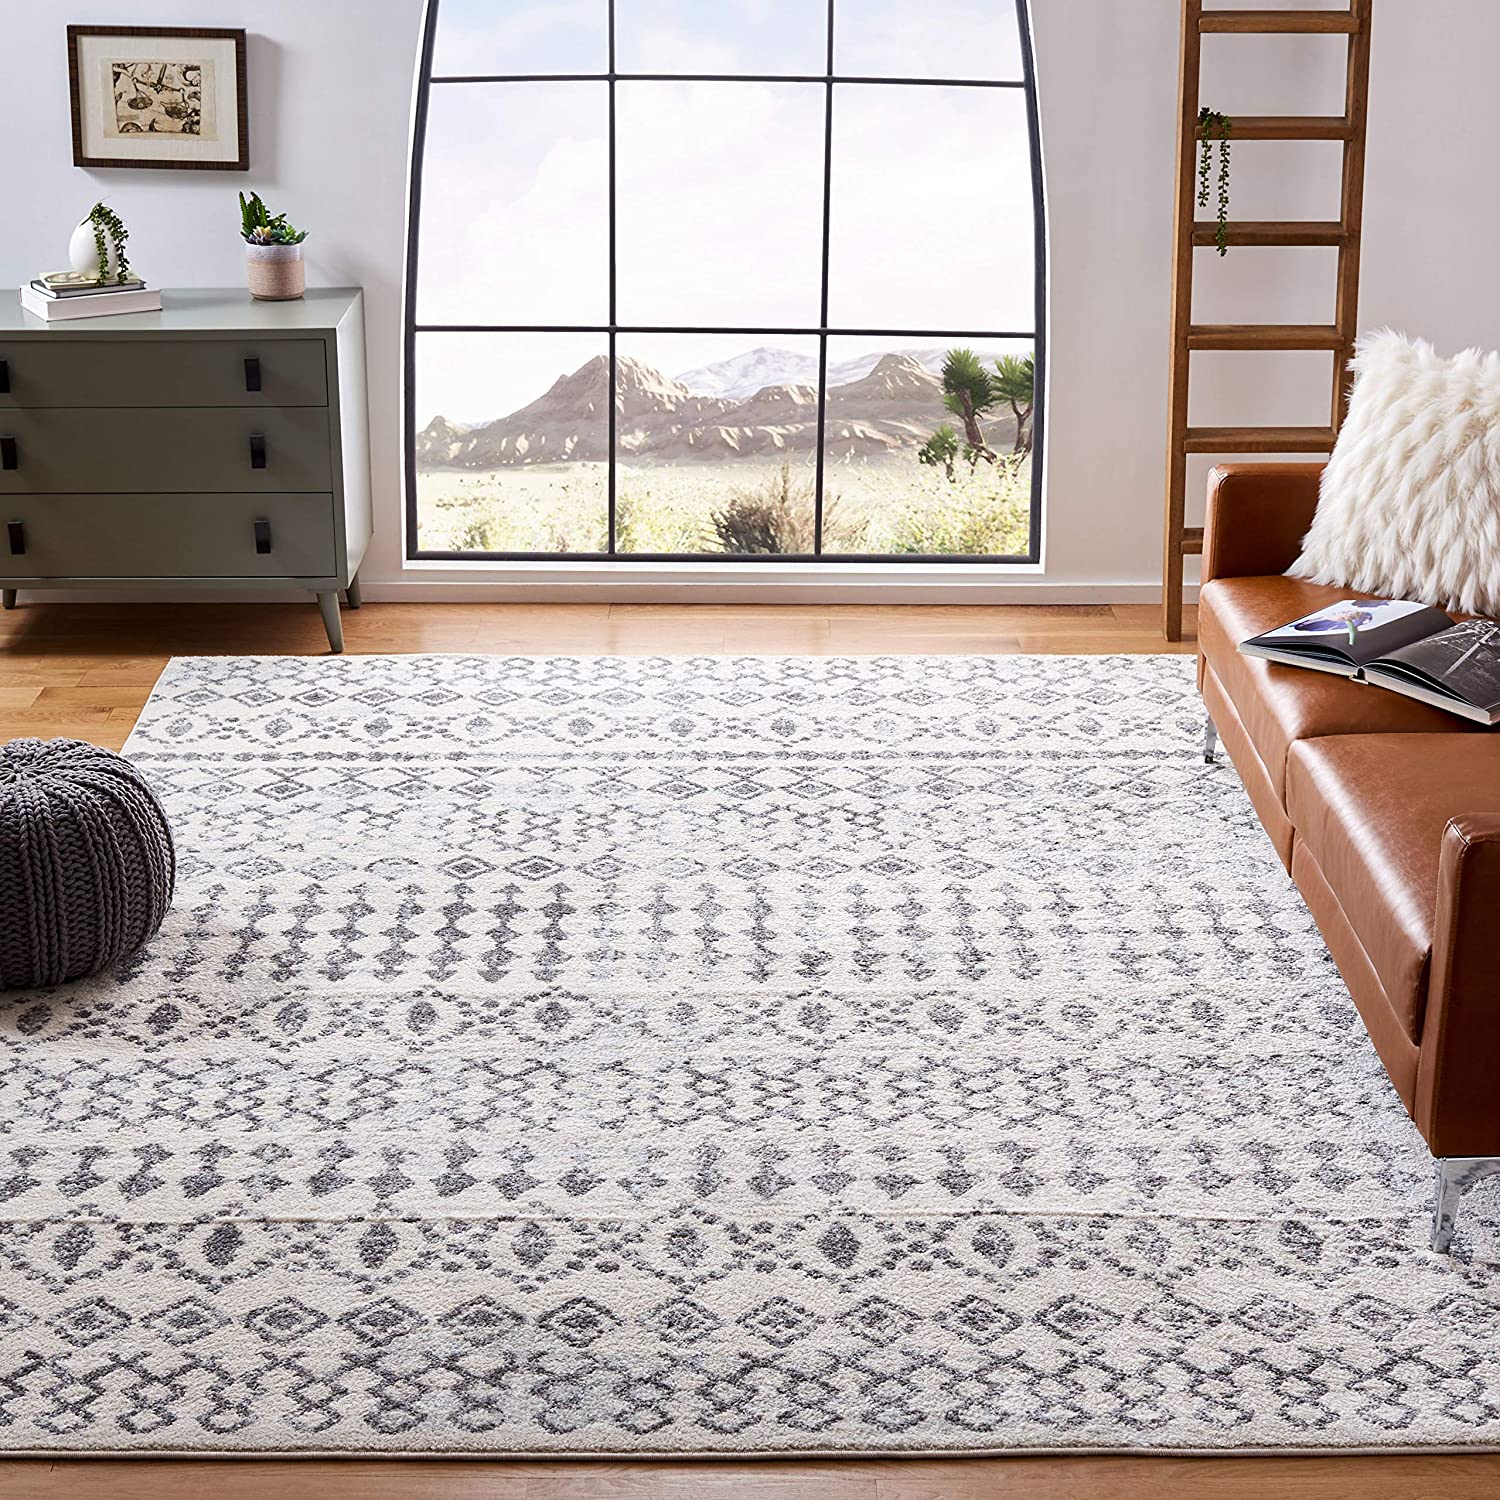 5'3" x 7'6" Safavieh Tulum Collection Area Rug (Ivory/Grey) $35.10 + Free Shipping